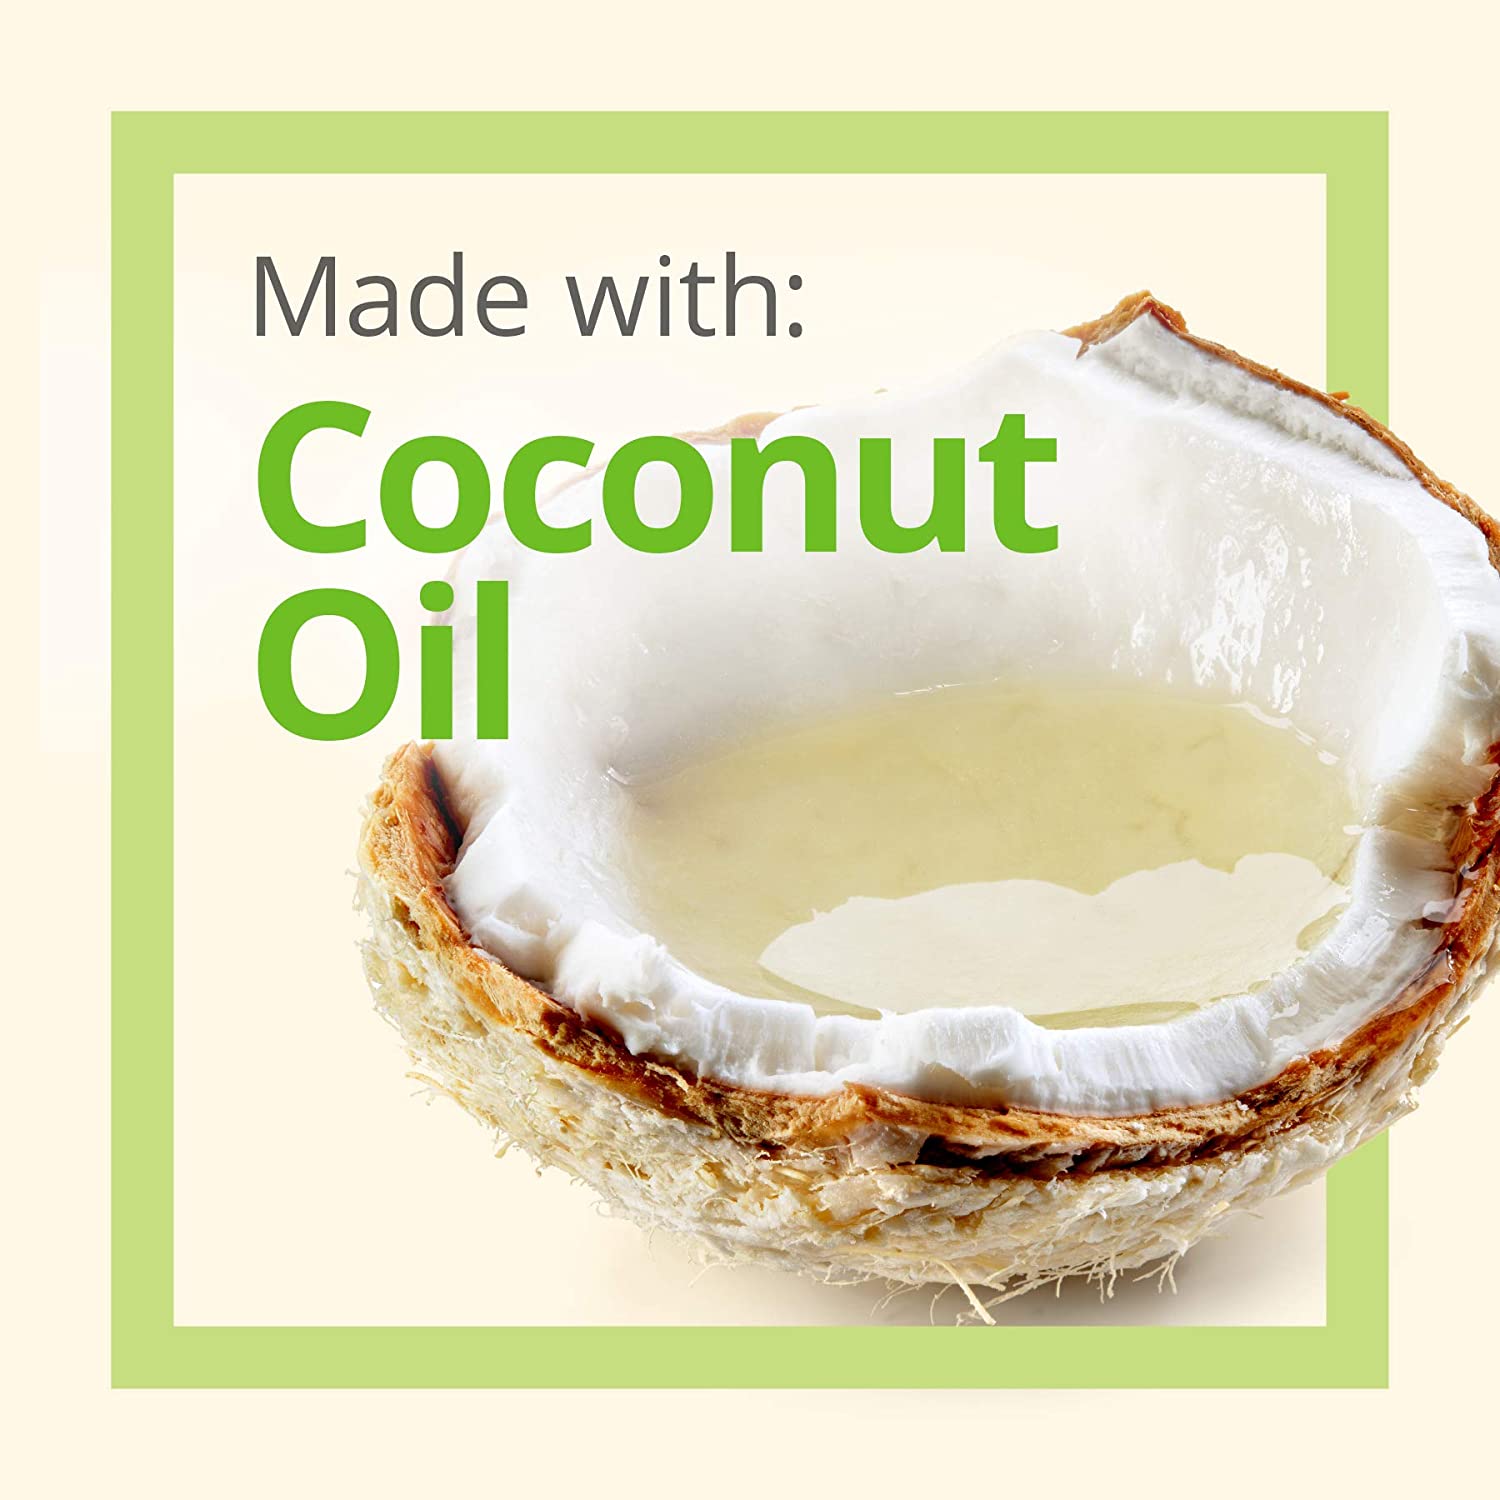 Treehut Coconut Lime Scrub 532 ml, Infused with Coconut Extract for skin conditioning and Lime Extract for skin polishing - It is made with certified Organic Shea Butter for skin repairing and moisturizing, anti-aging and promoting elasticity - 450987